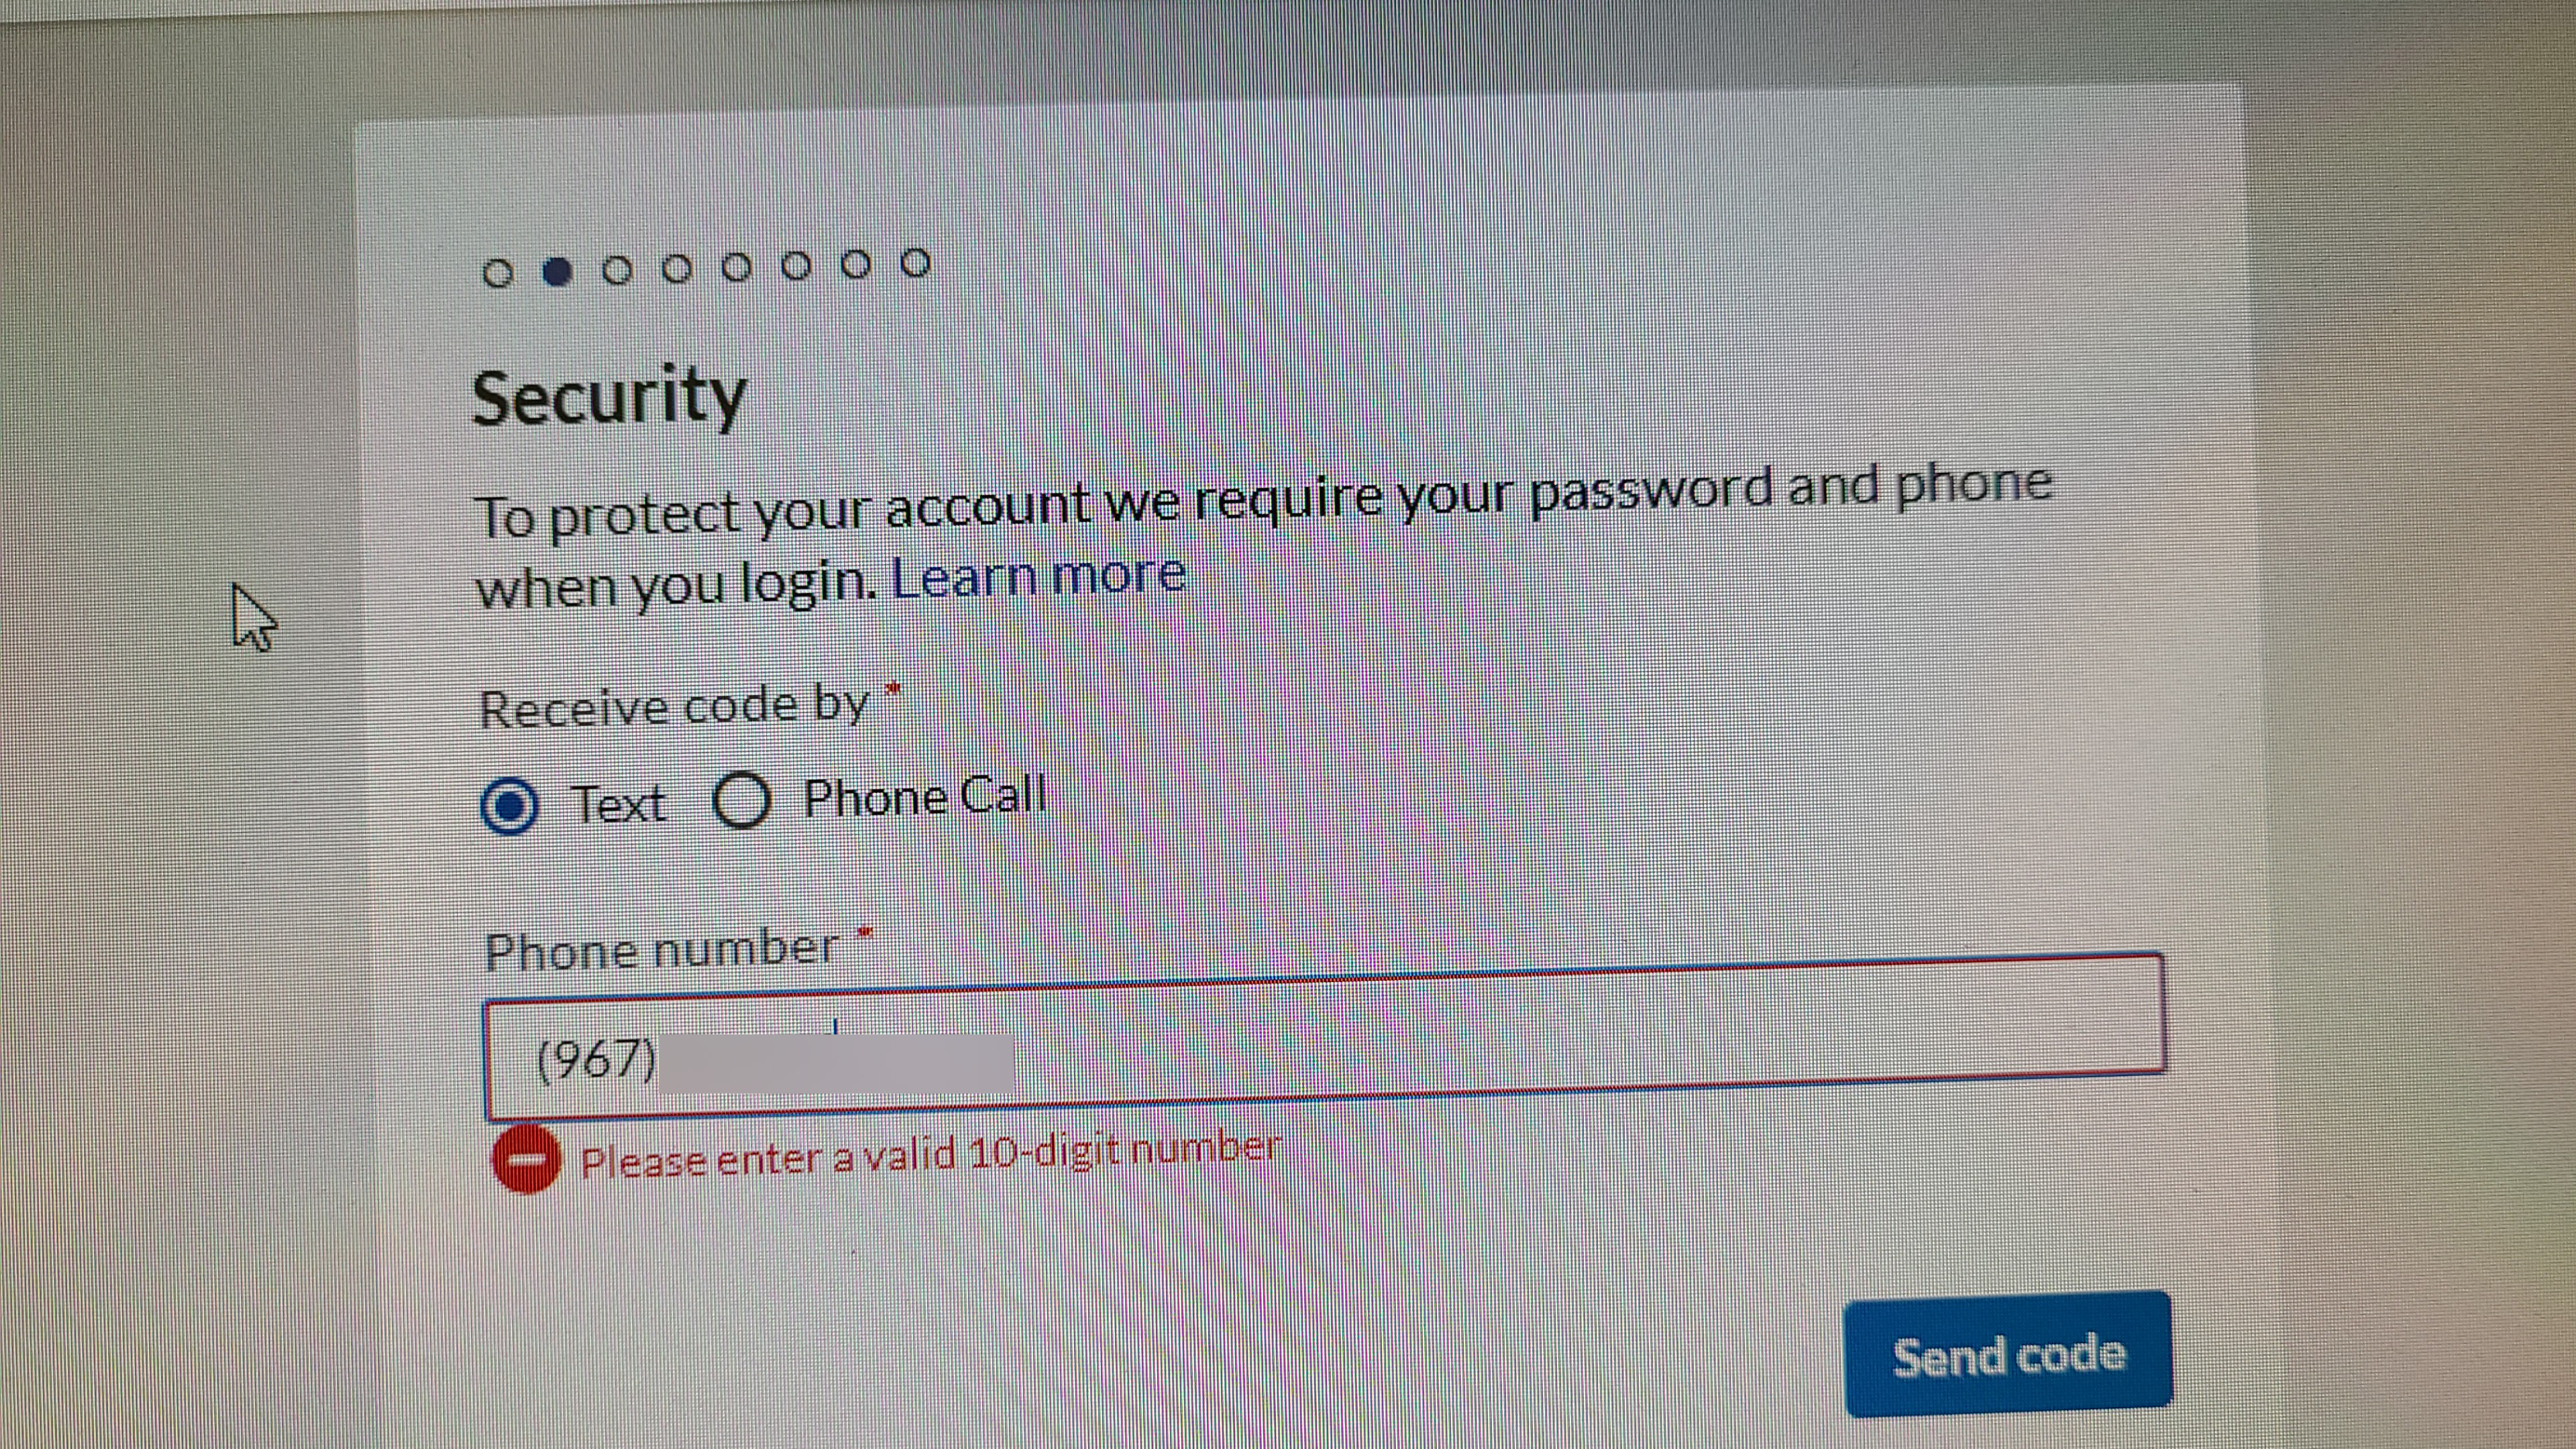 bill.com requires US telephone number to sign up